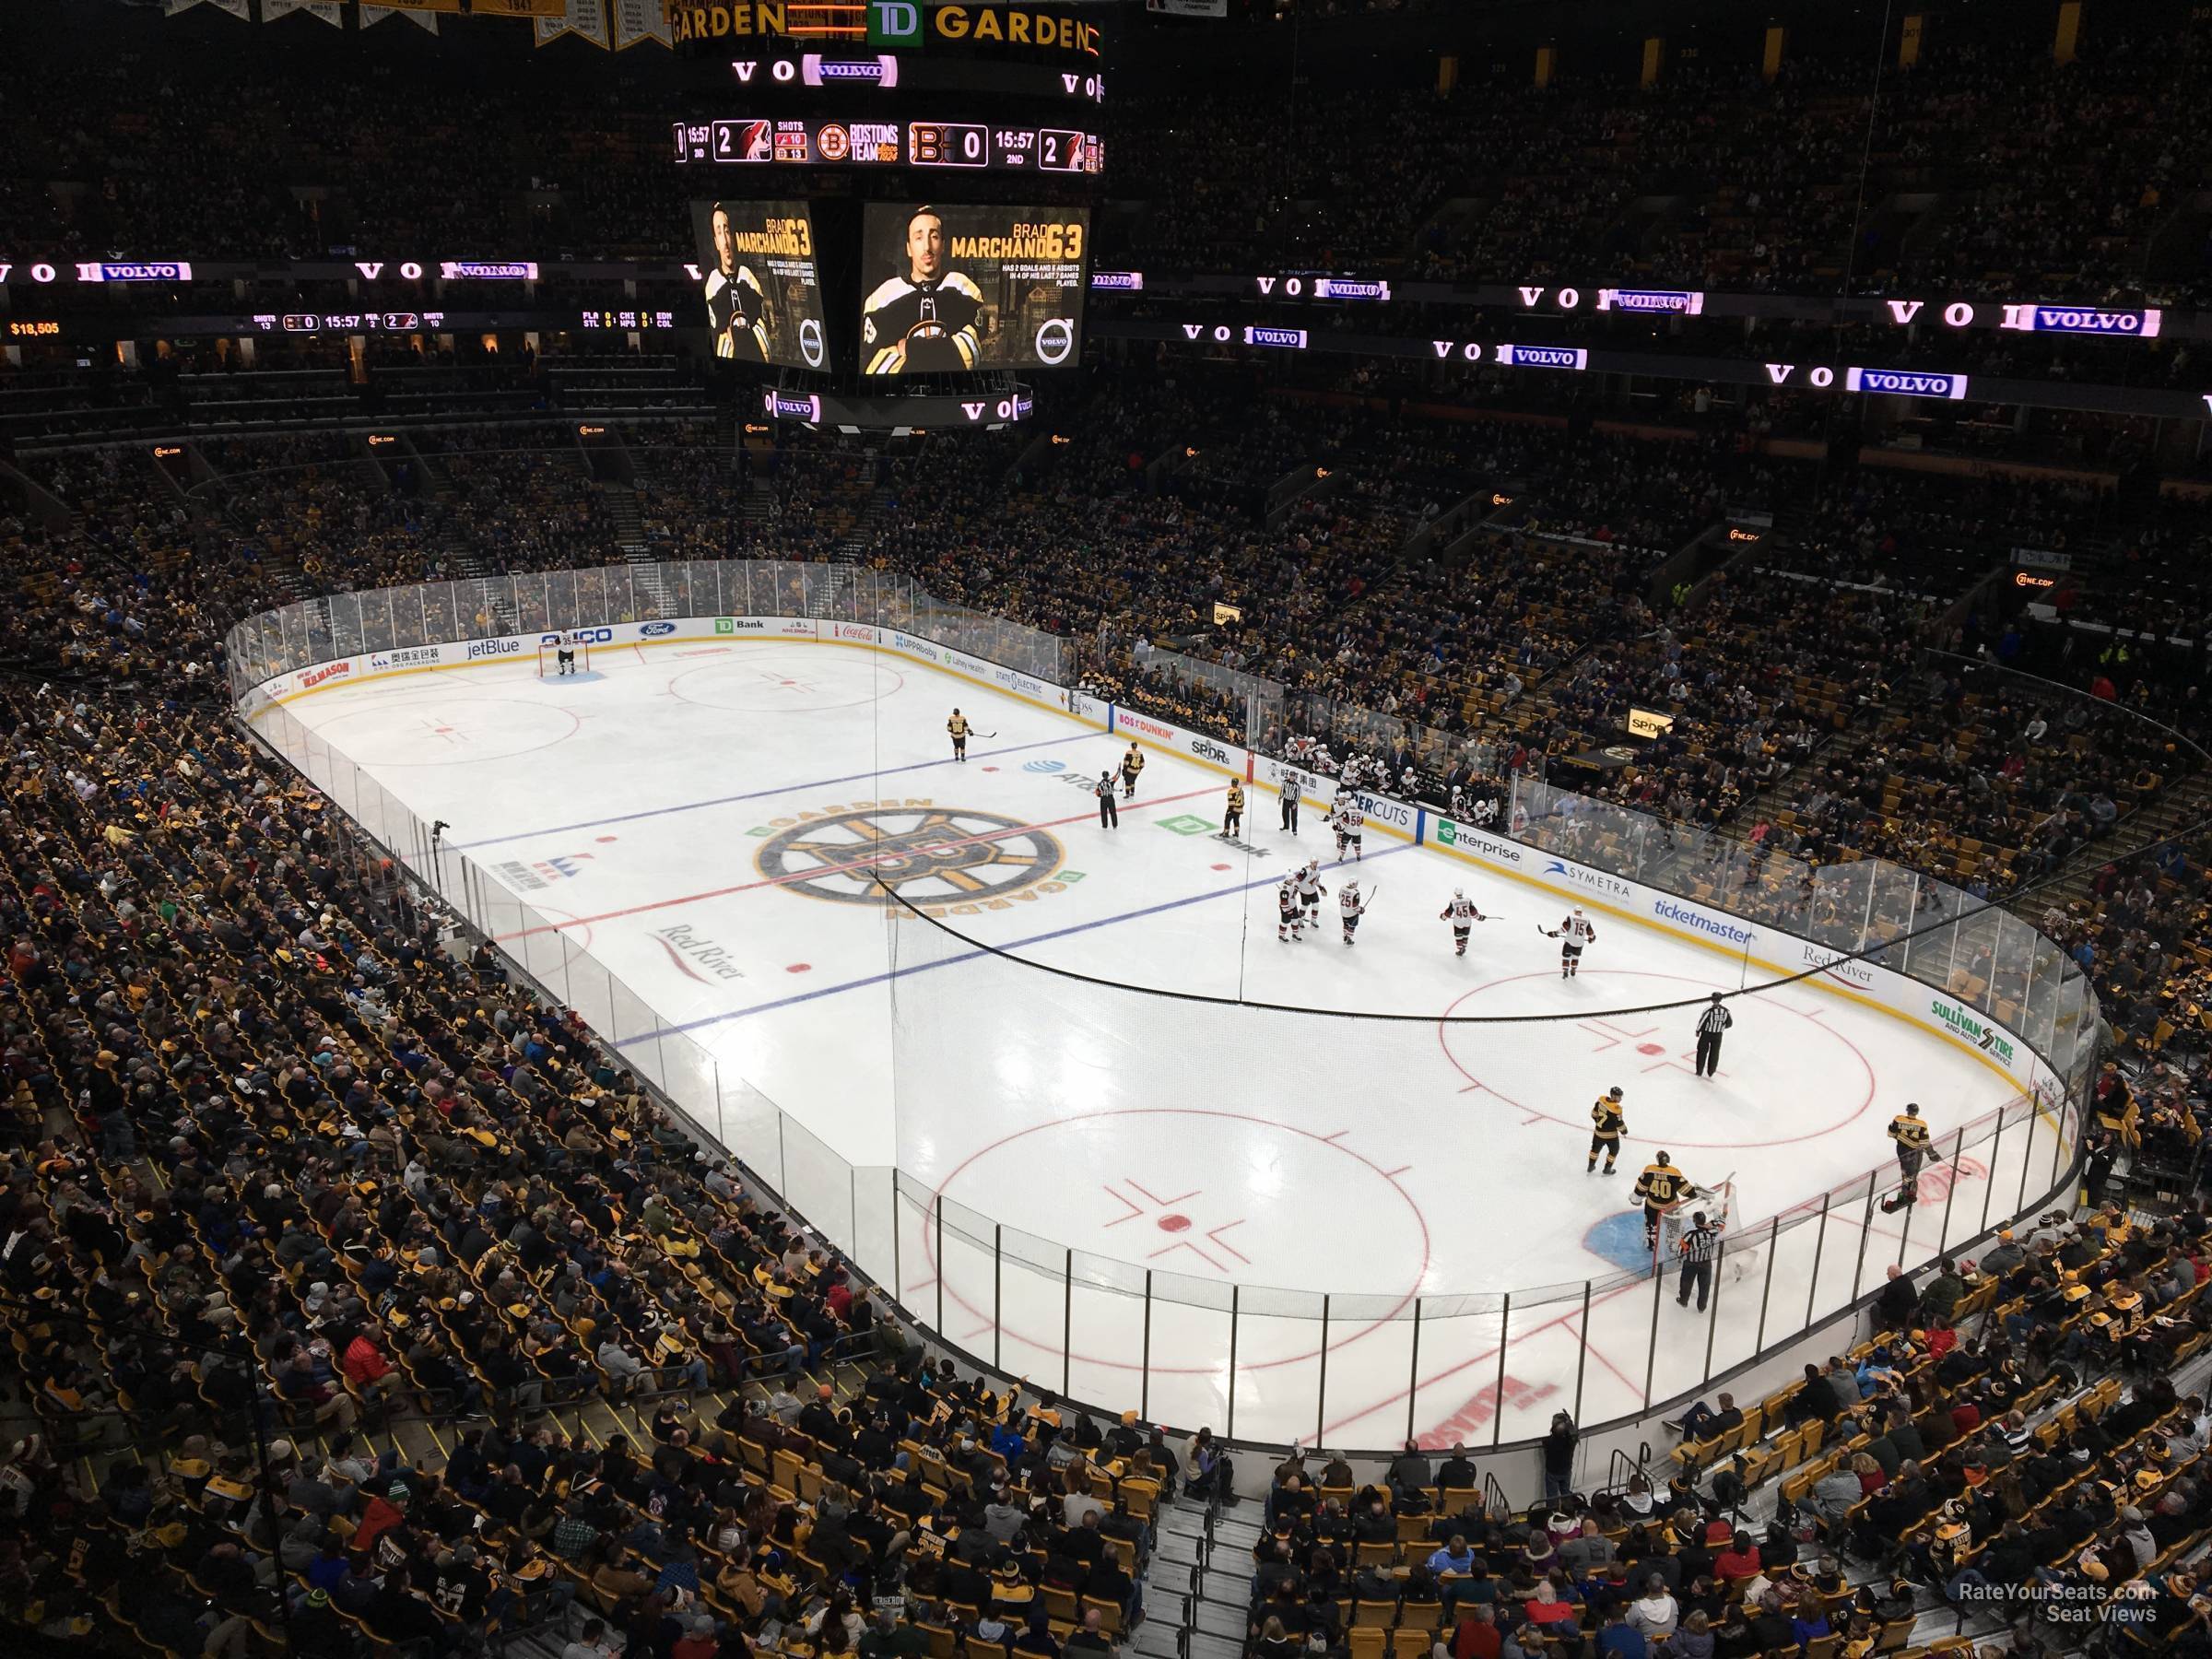 section 311, row 3 seat view  for hockey - td garden